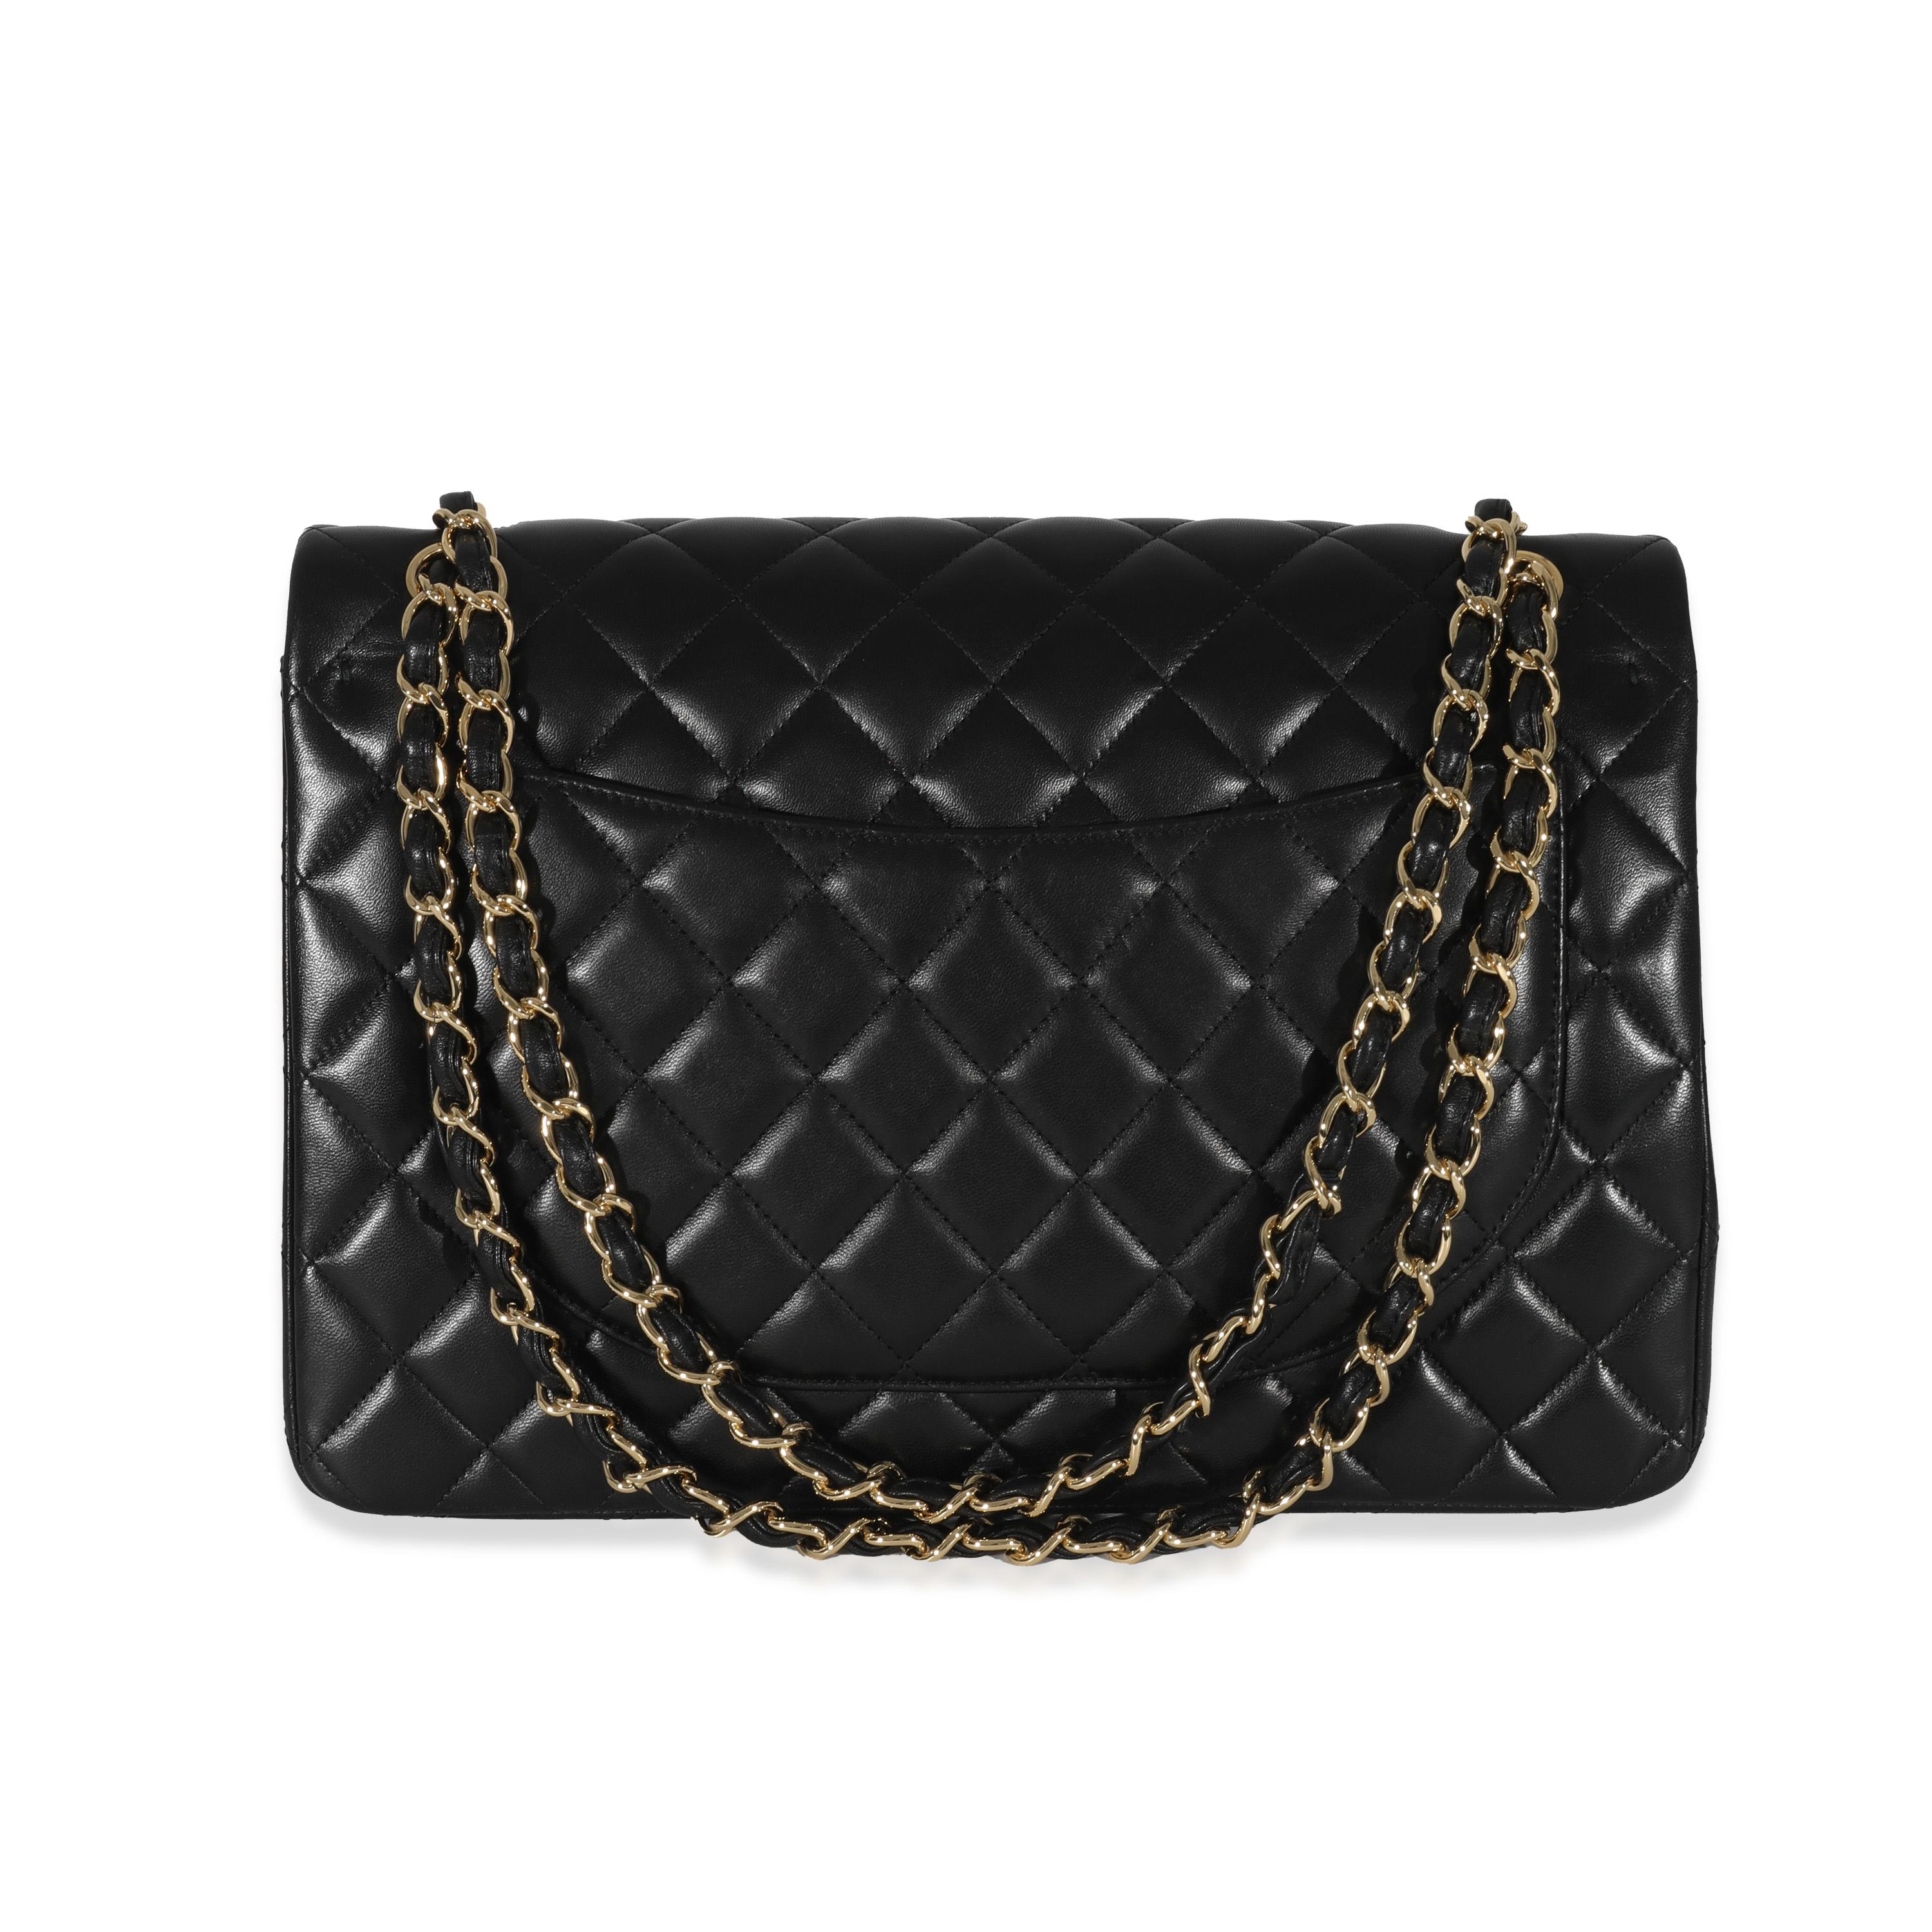 Chanel Black Lambskin Classic Maxi Double Flap Bag In Excellent Condition For Sale In New York, NY